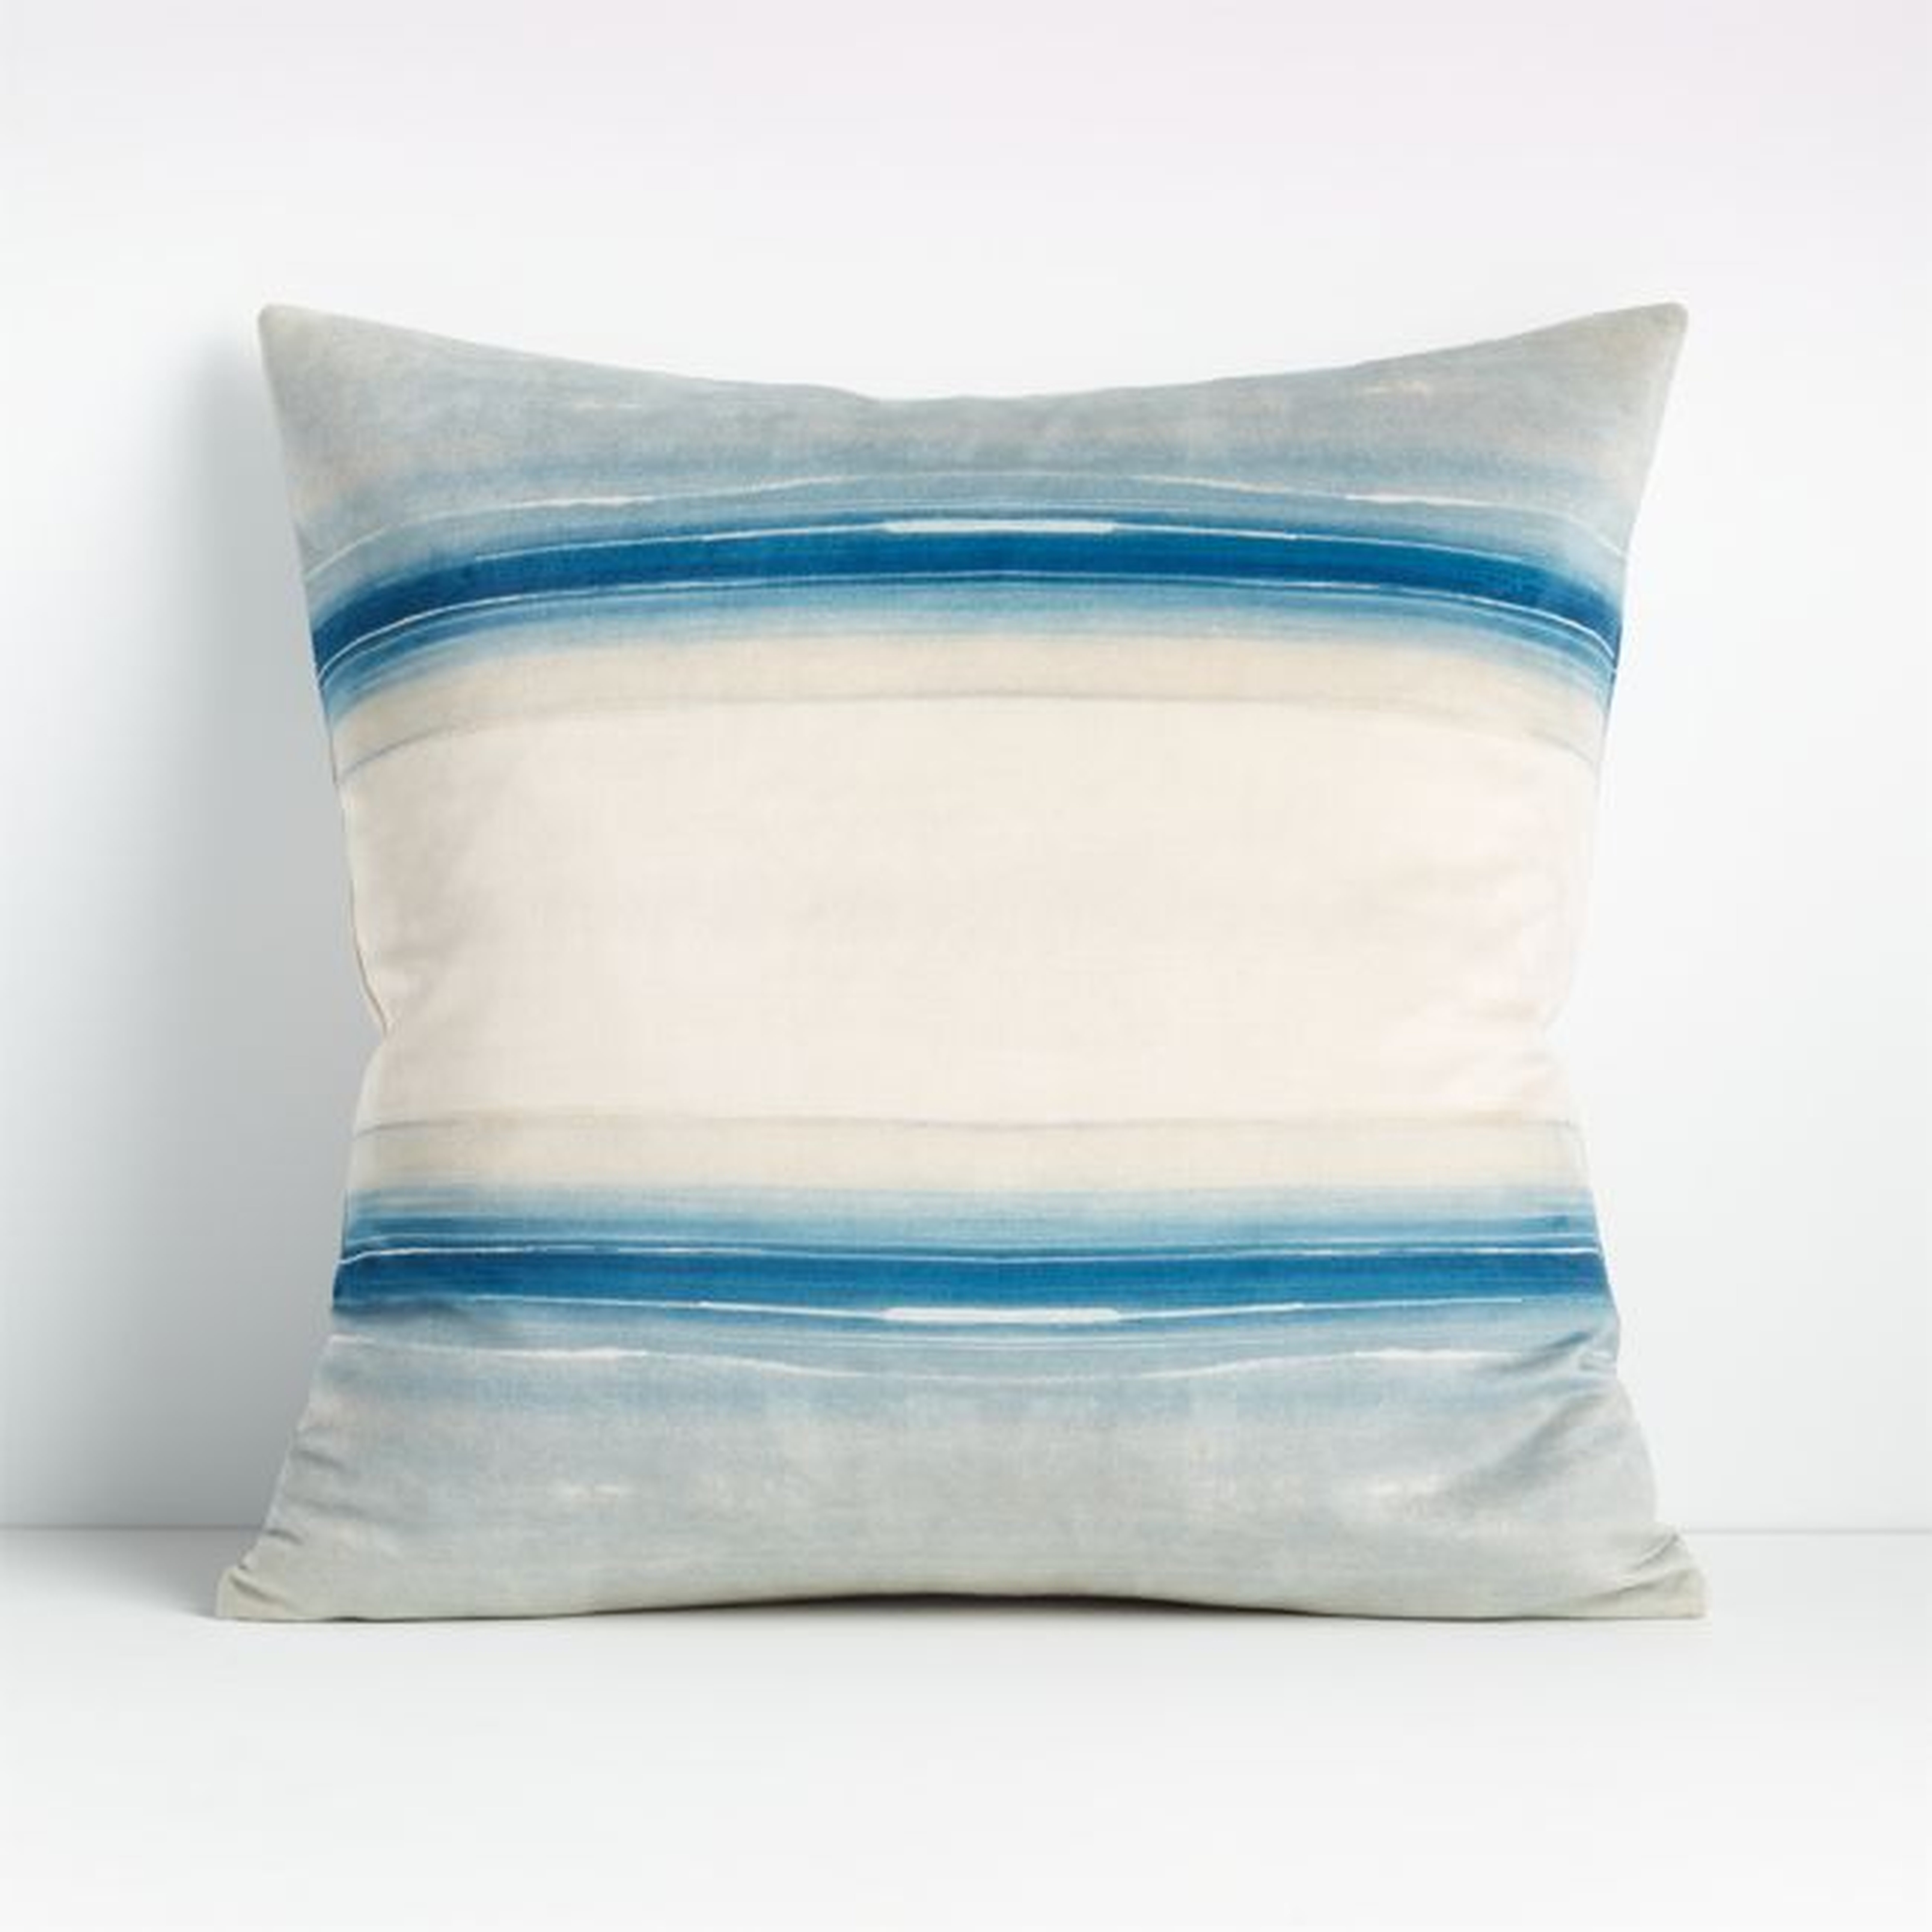 Tadashi 20" Velvet Pillow with Feather-Down Insert - Crate and Barrel